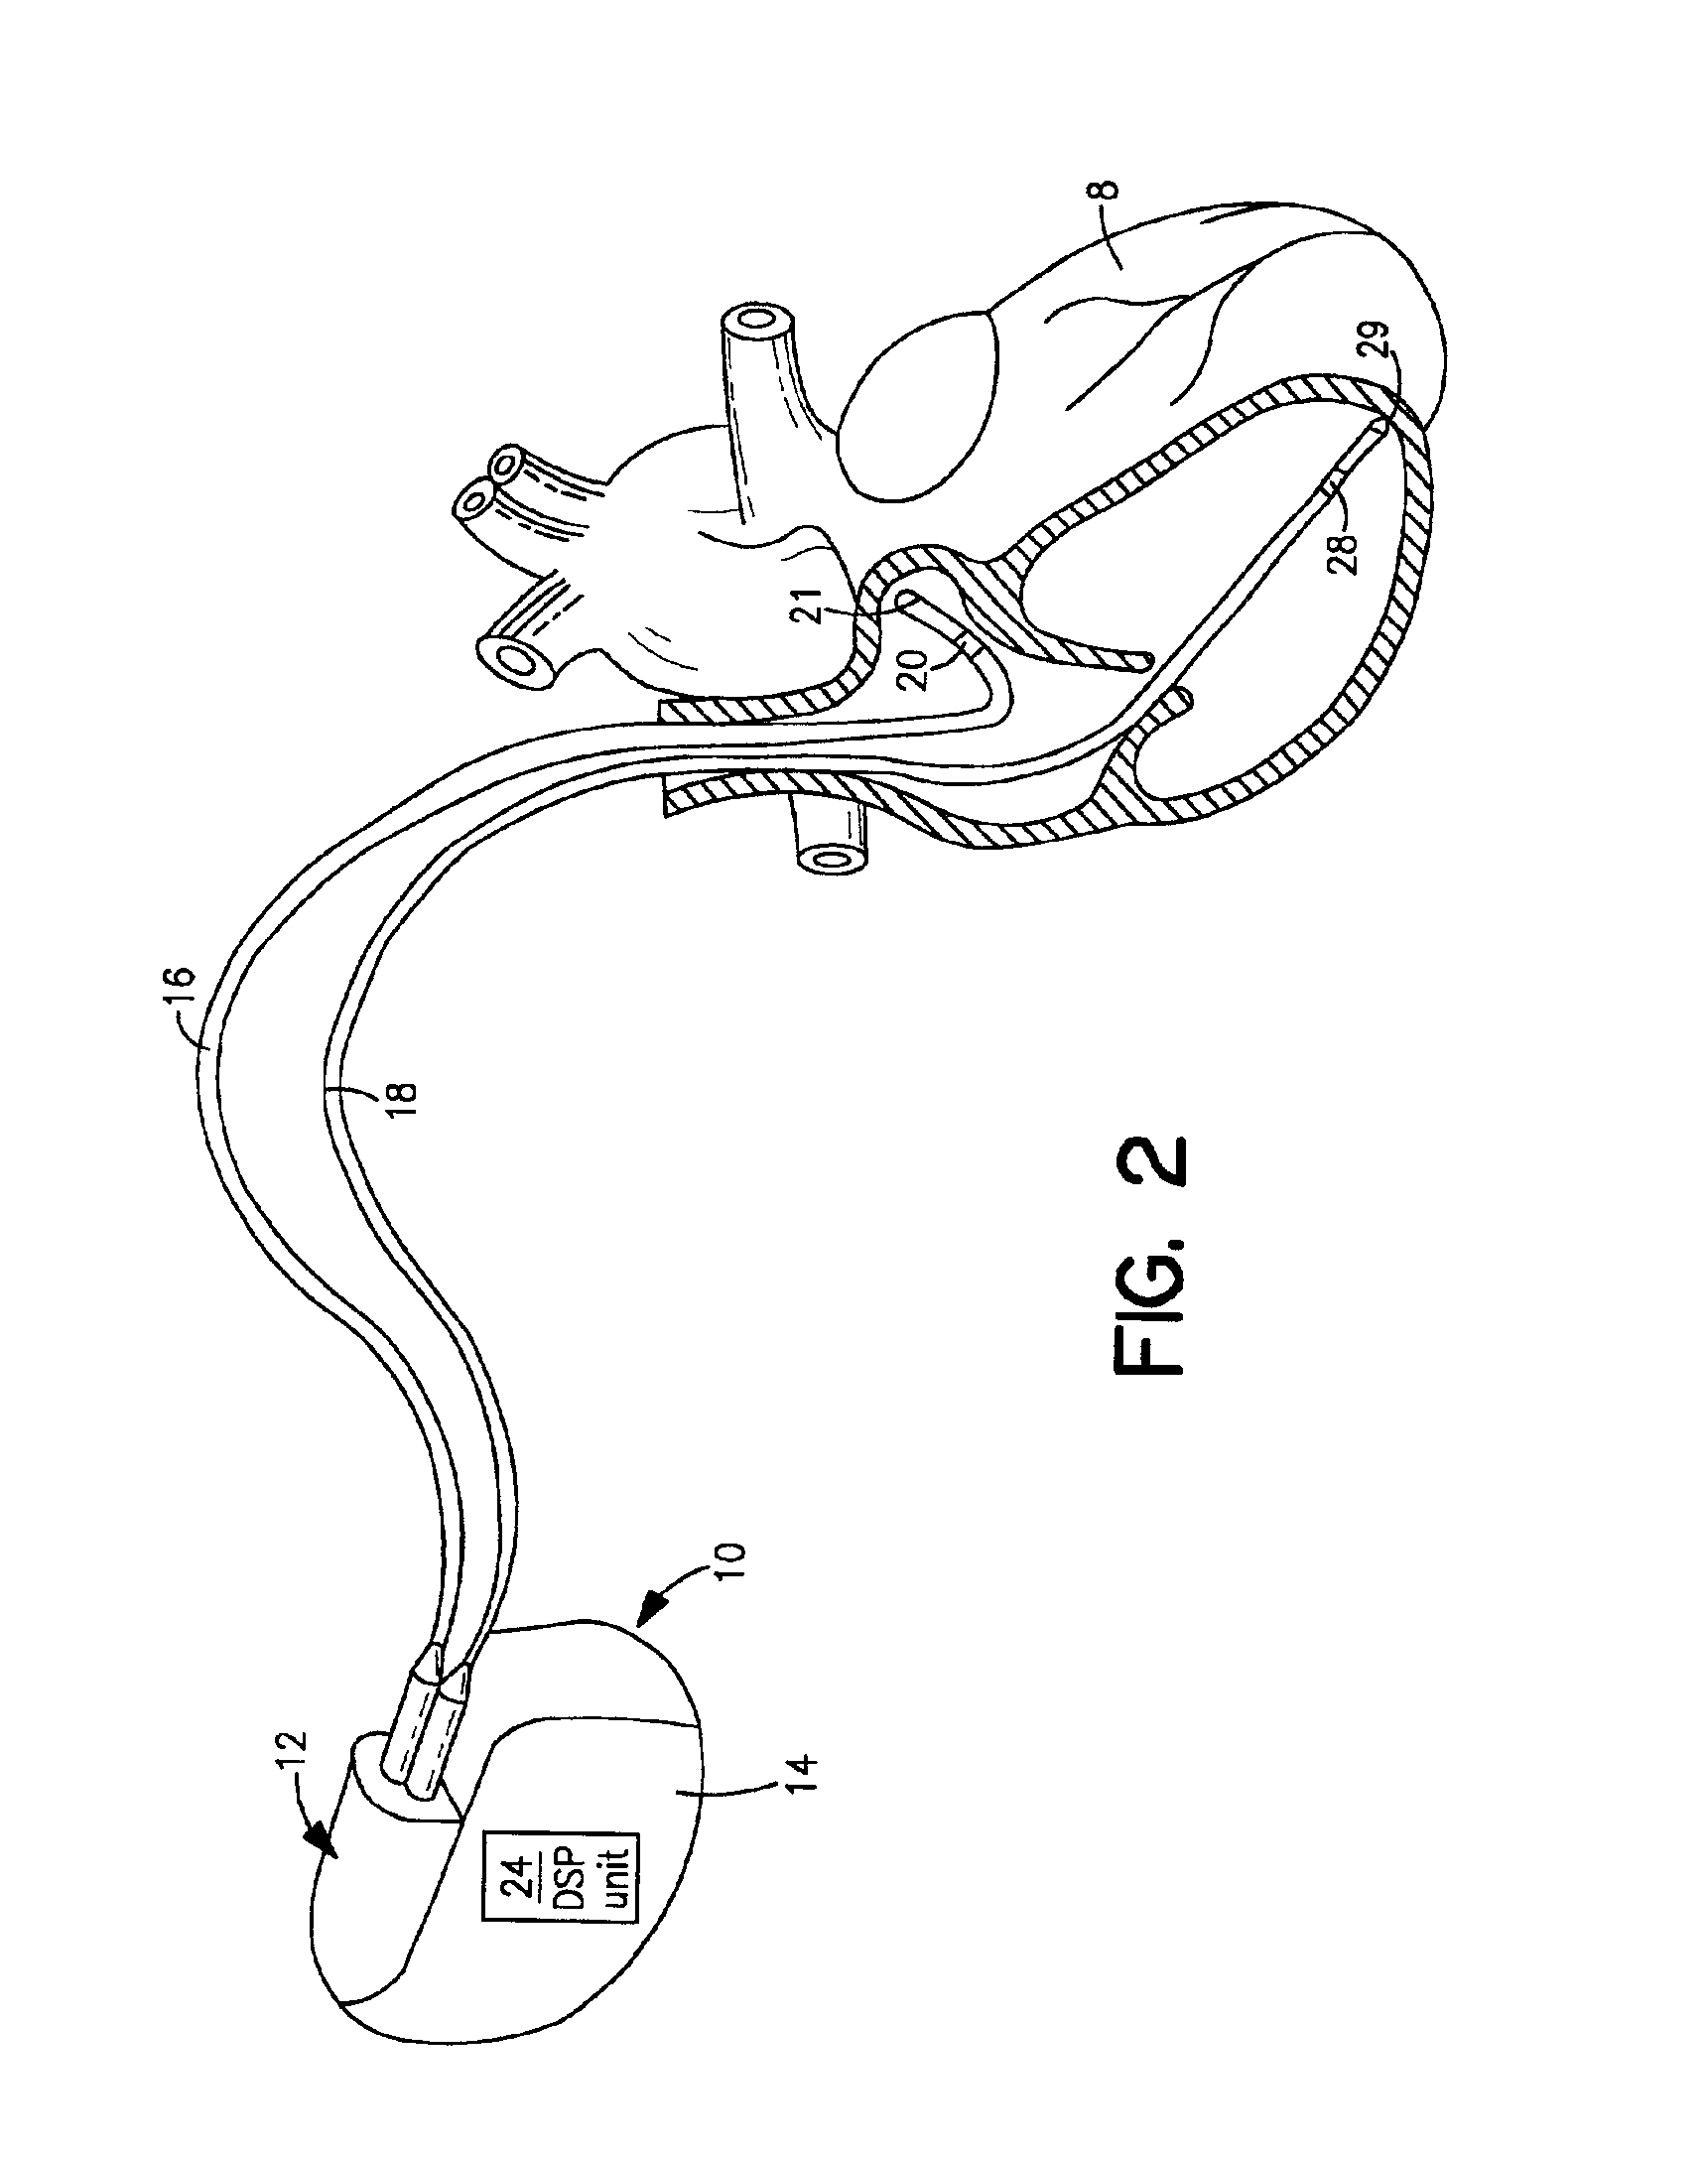 Method and system for transferring and storing data in a medical device with limited storage and memory